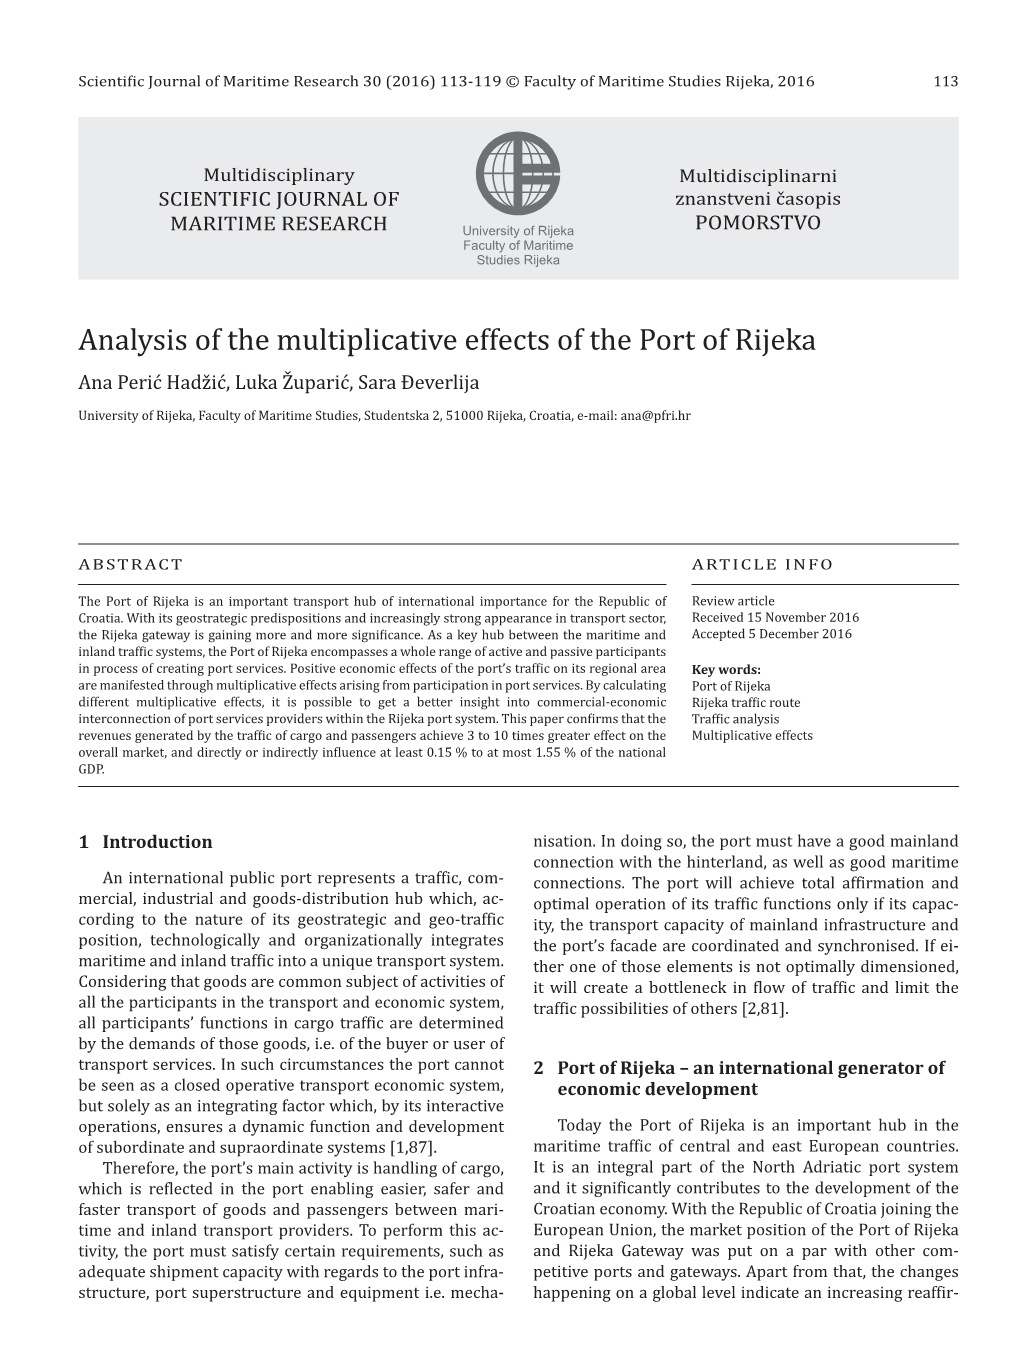 Analysis of the Multiplicative Effects of the Port of Rijeka